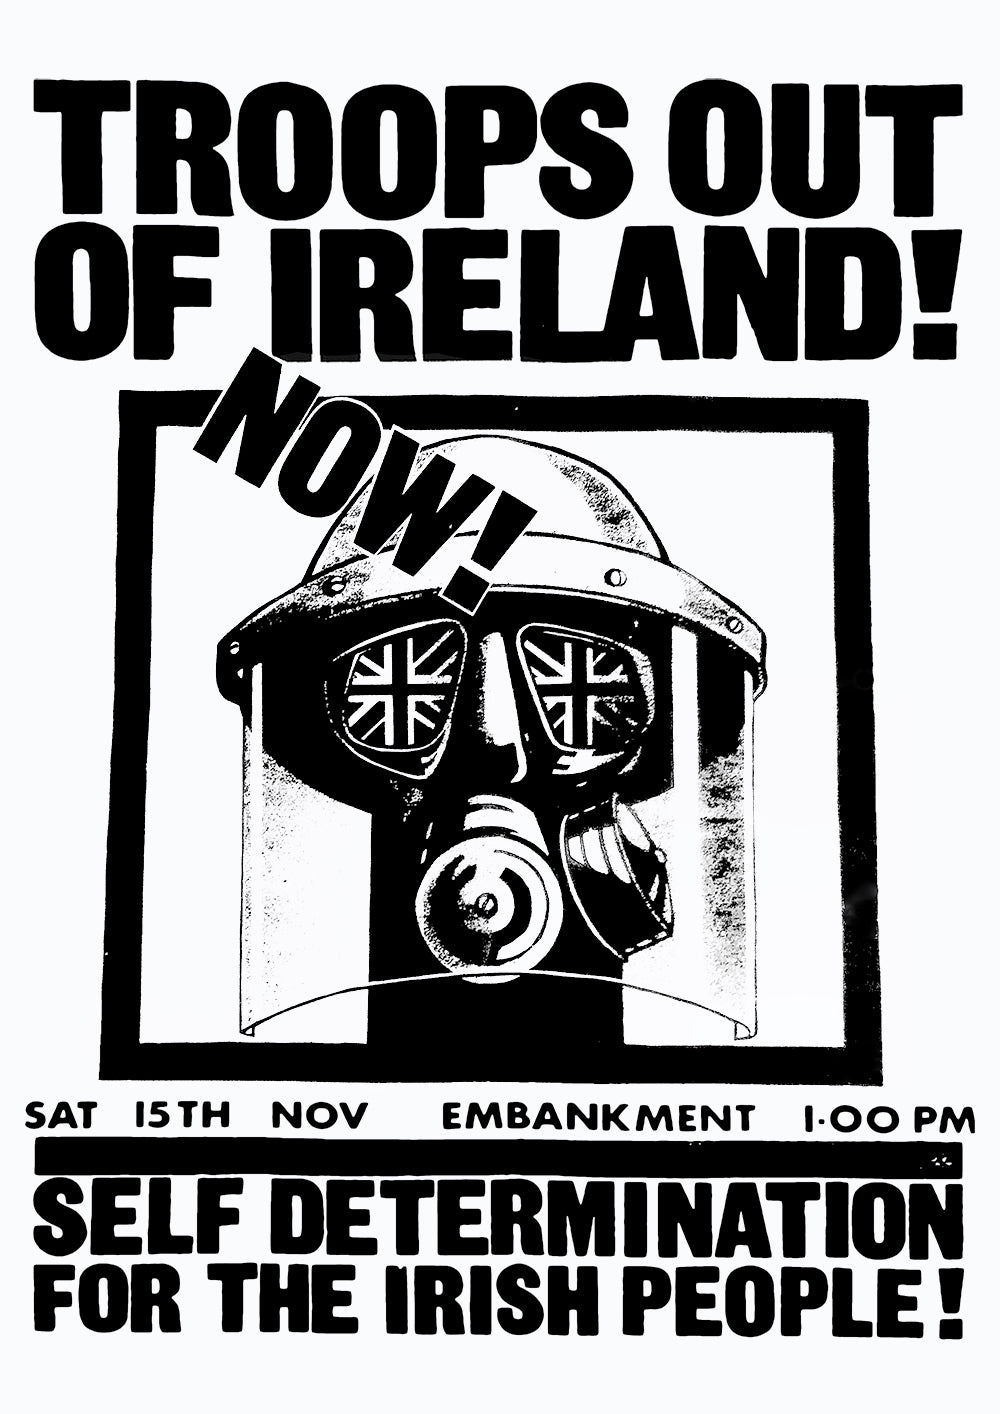 Troops out of Ireland! — British poster